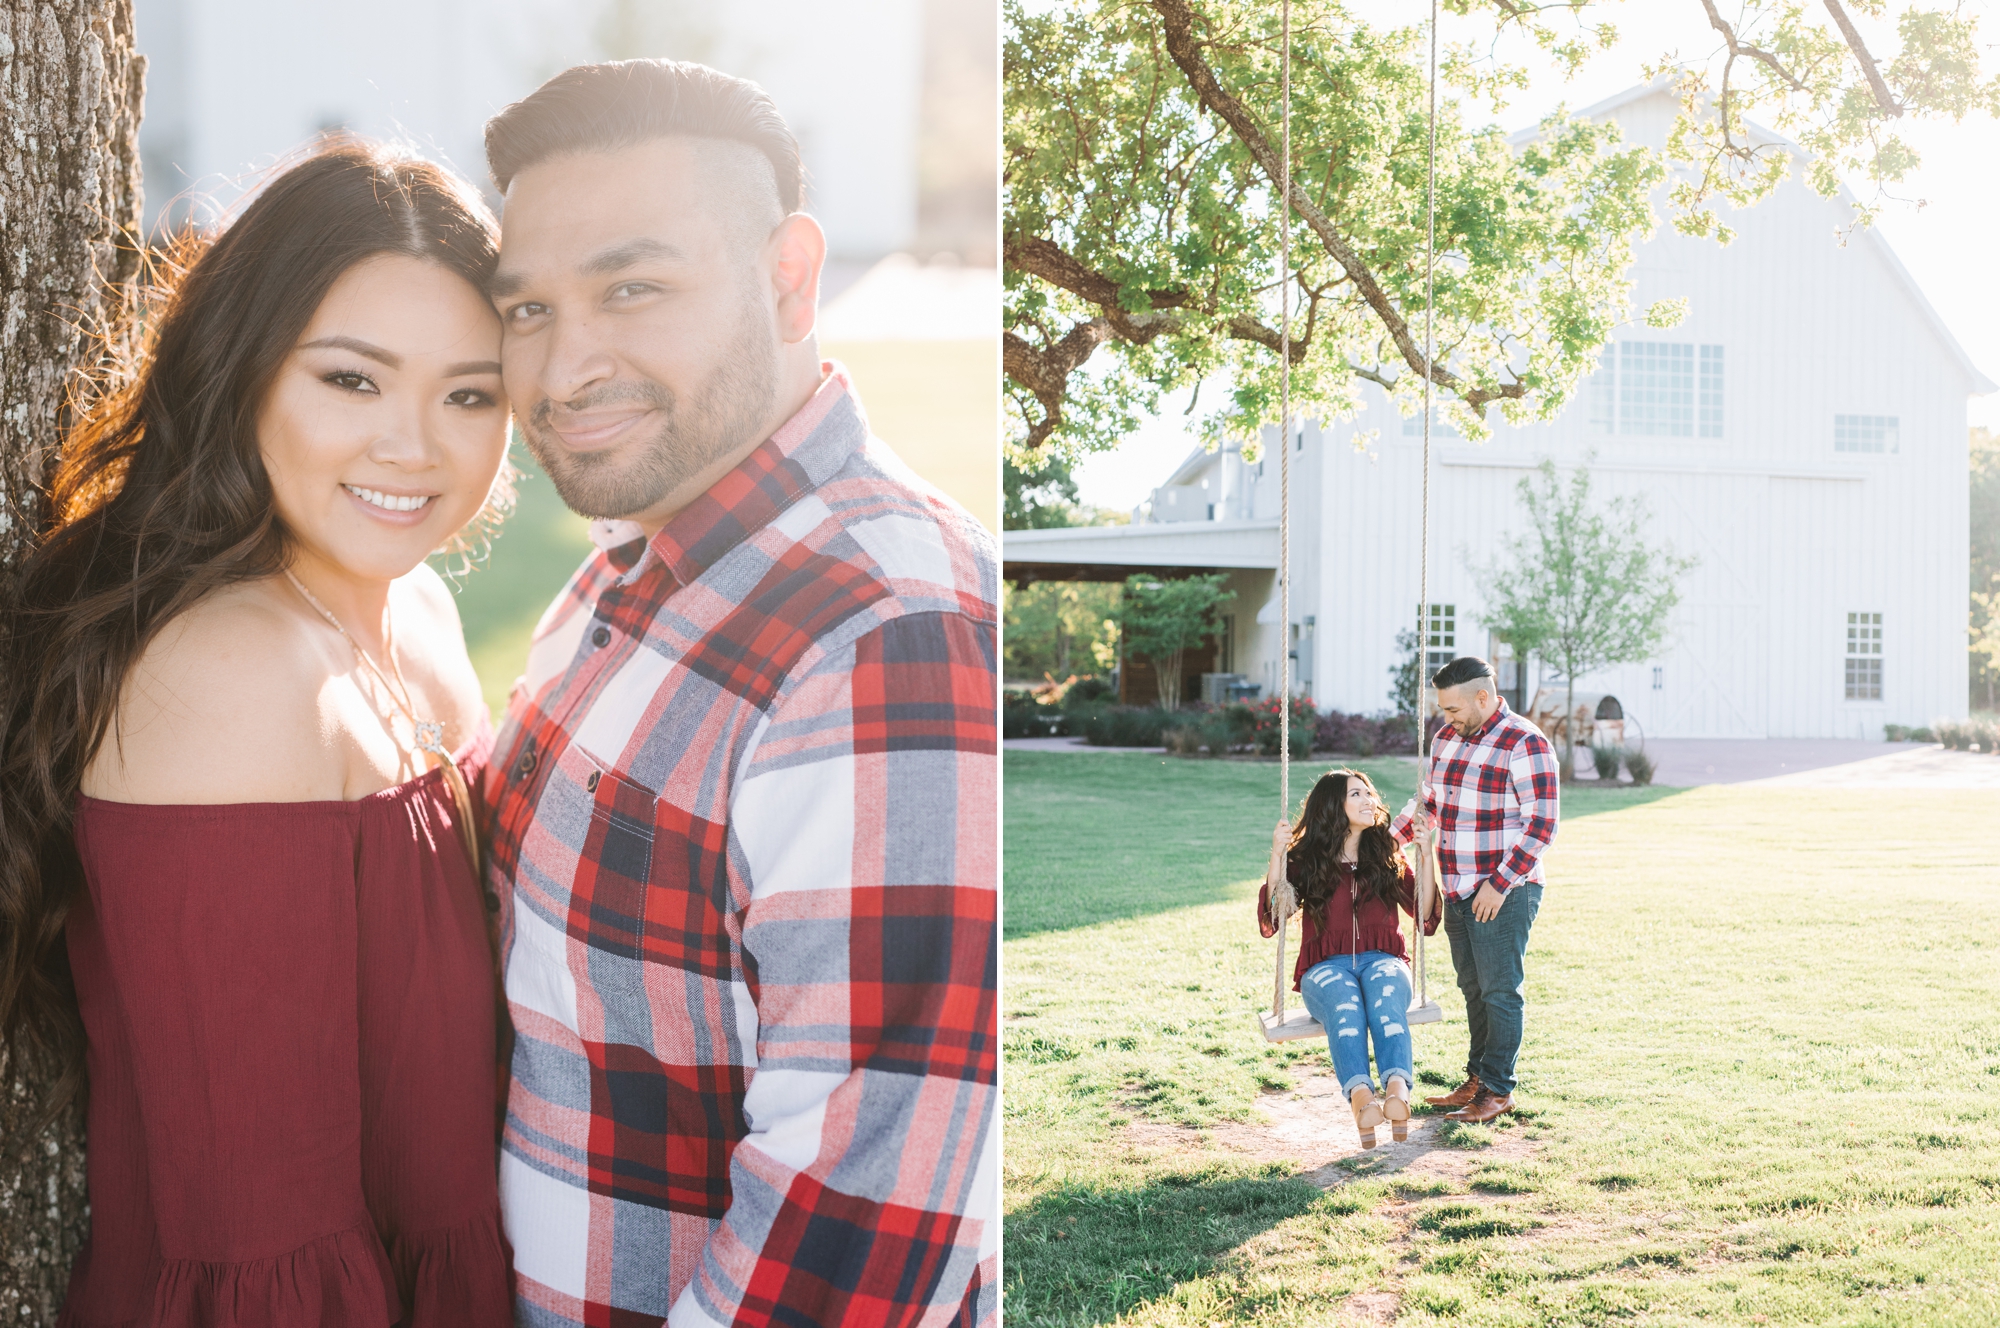 The White Sparrow Barn engagement photographer